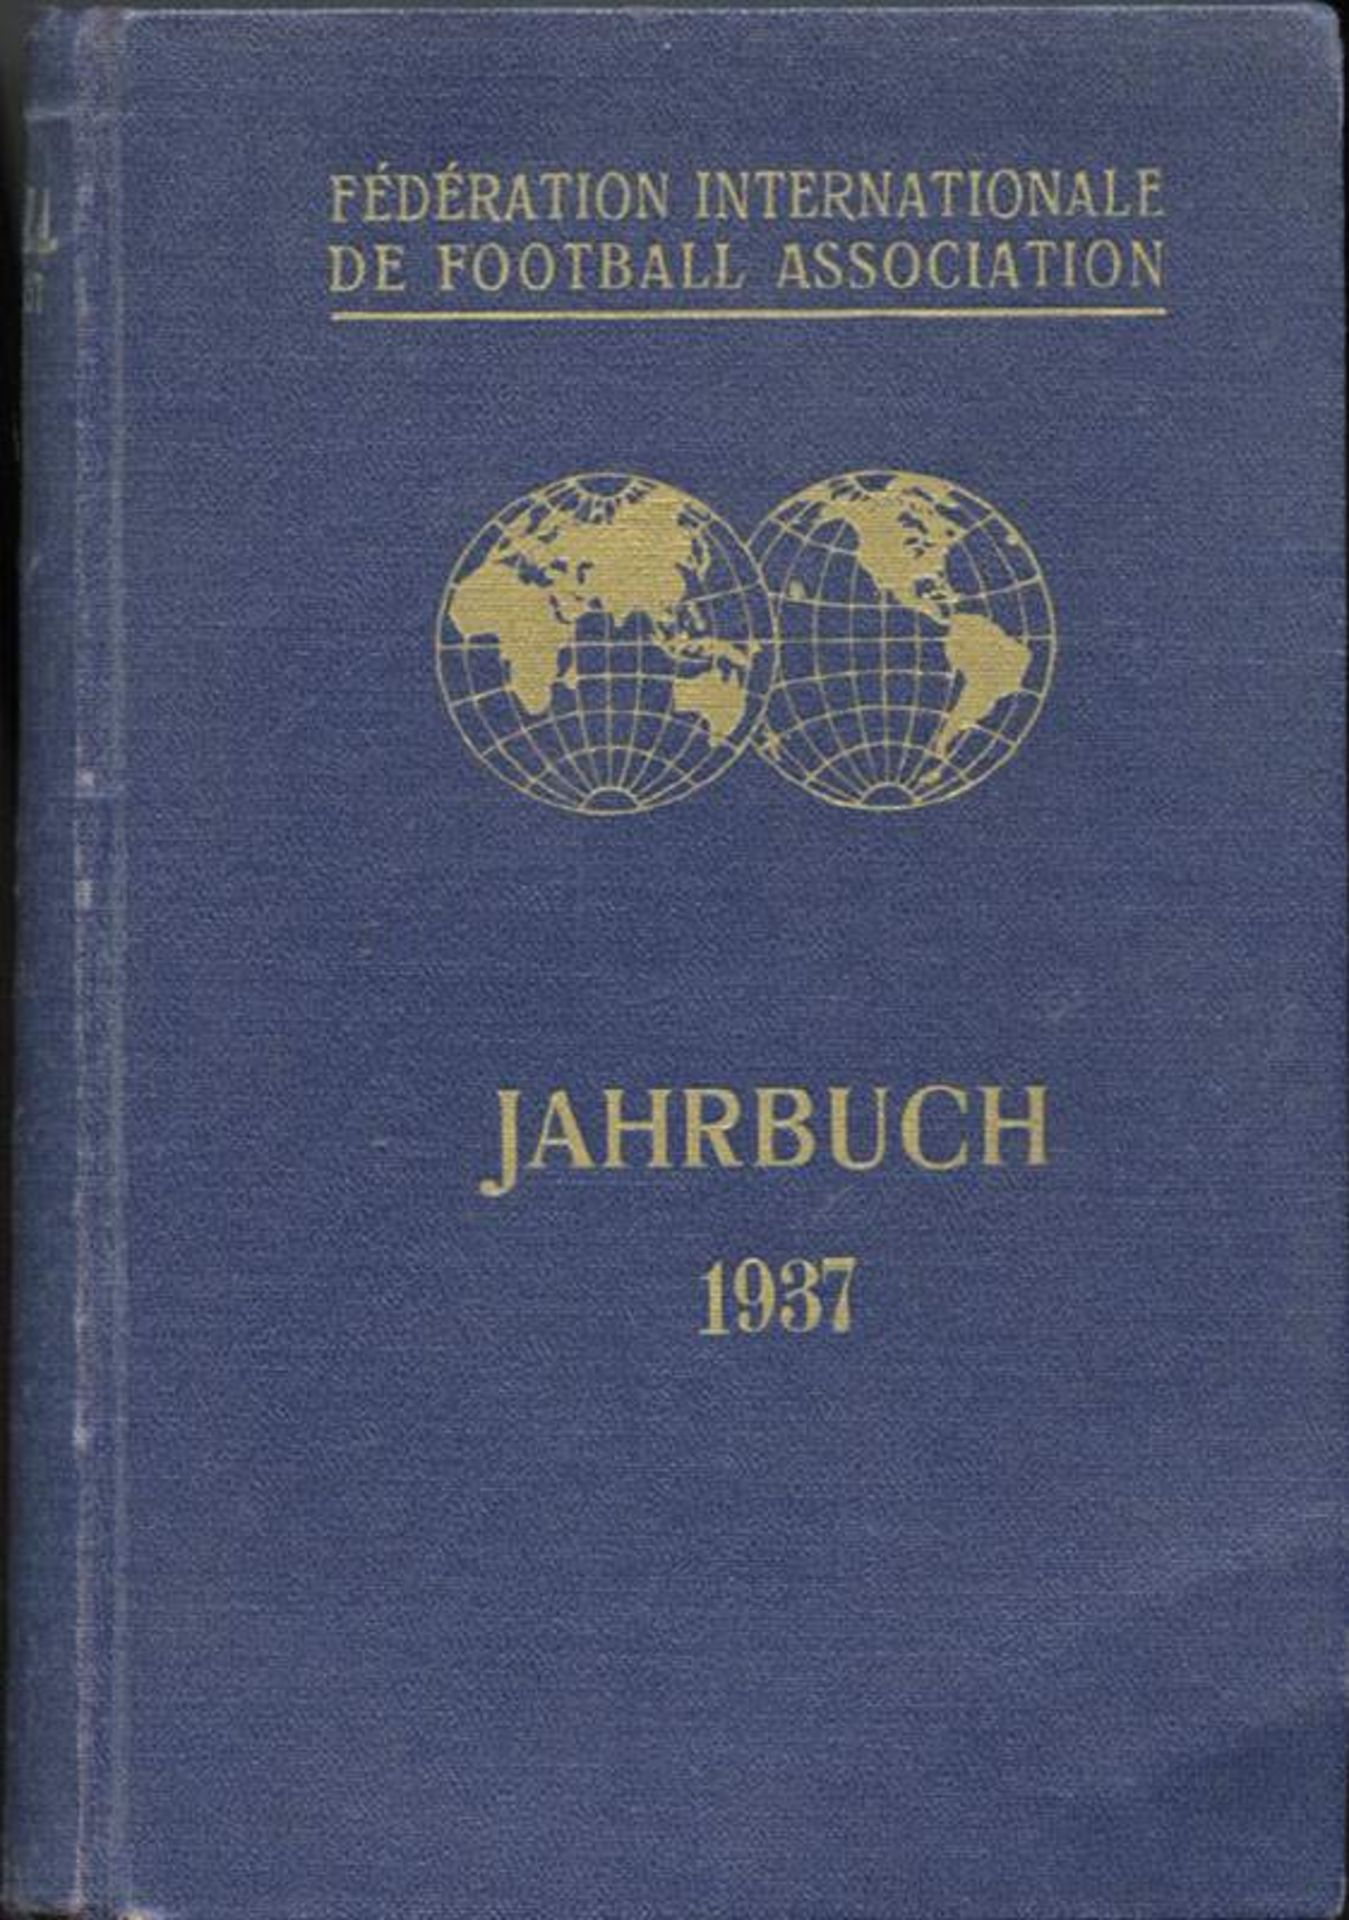 FIFA Yearbook 1937 - FIFA Yearbook 1937, in ENGLISH and GERMAN, a very rare reference book on